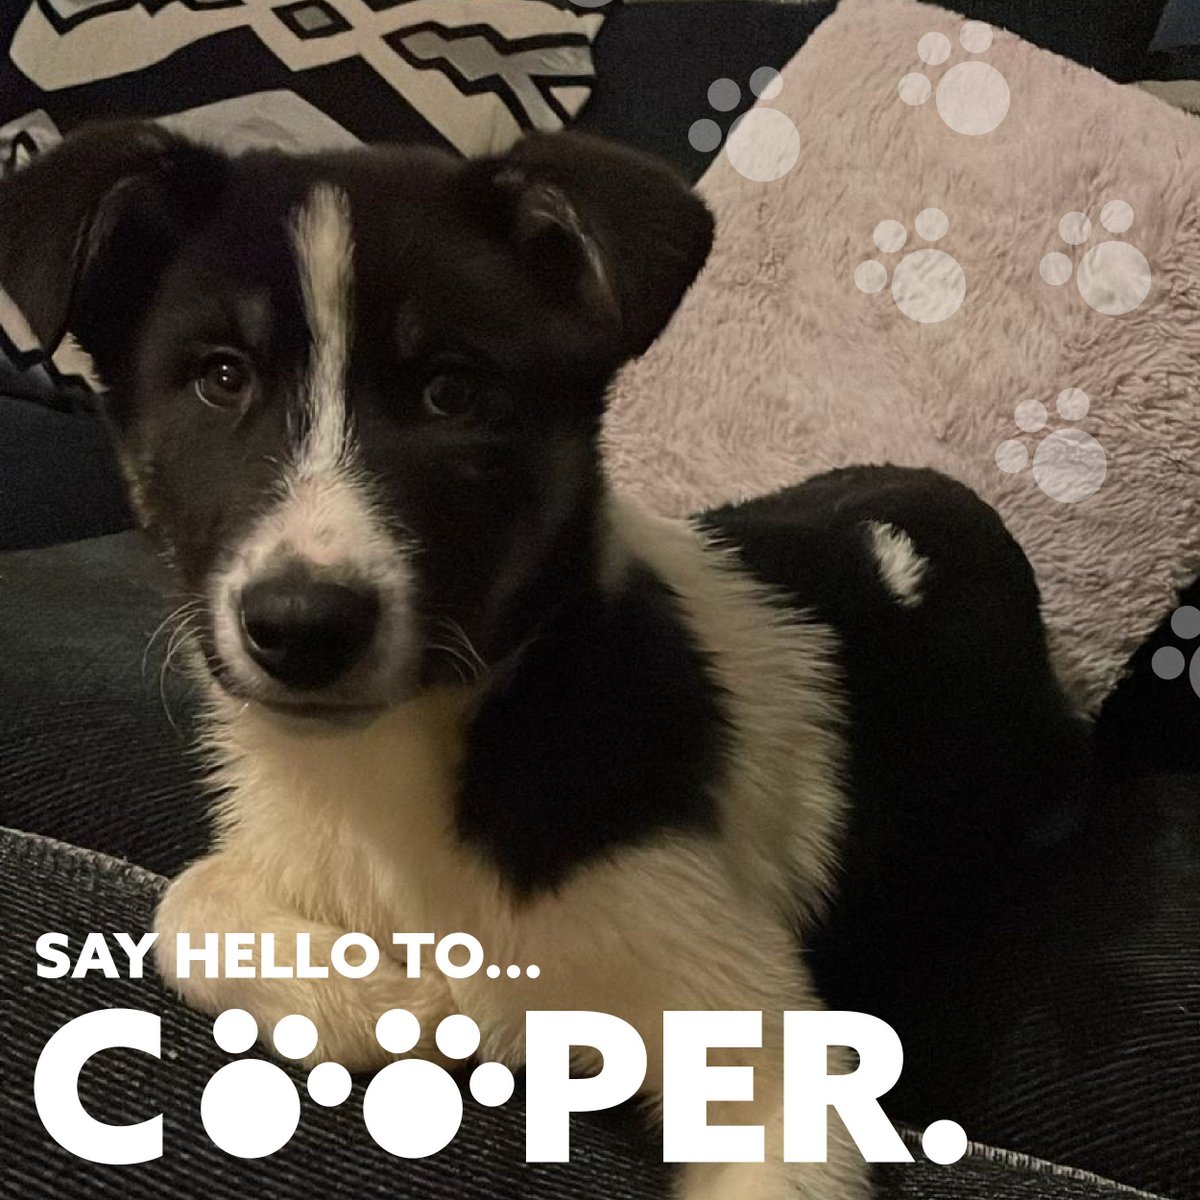 Is there anything more (extra) ordinary than having a pet? Say hello to Cooper, Ryan, who we work for's new super cute puppy! #NationalPetMonth2024 #BetterIsPossible #SupportingGoodLives #ExtraOrdinary